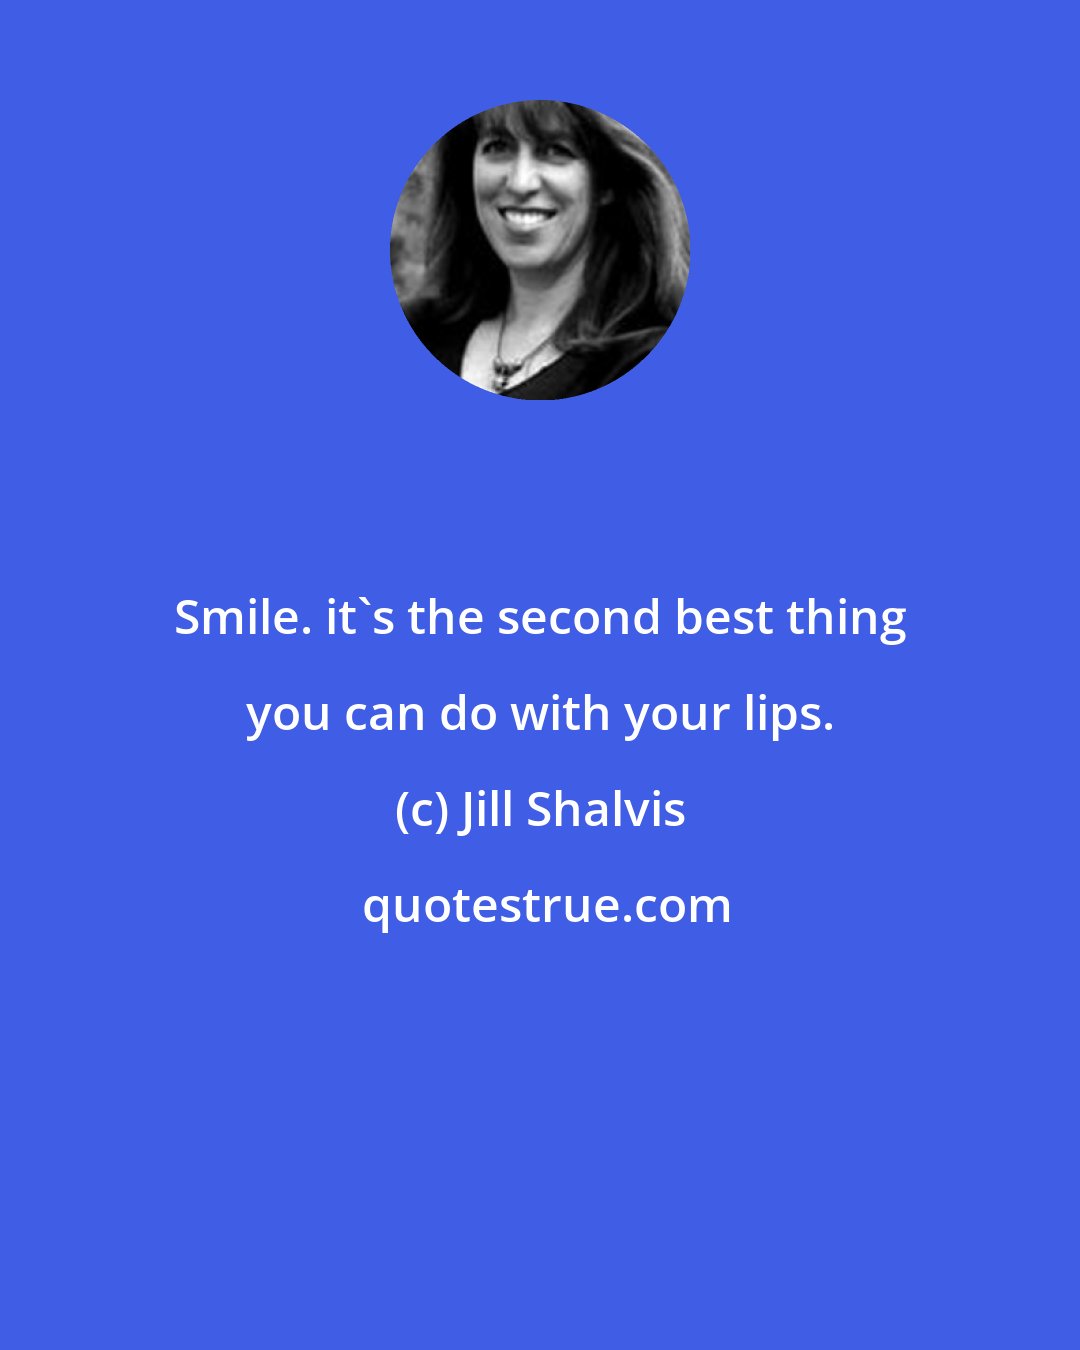 Jill Shalvis: Smile. it's the second best thing you can do with your lips.